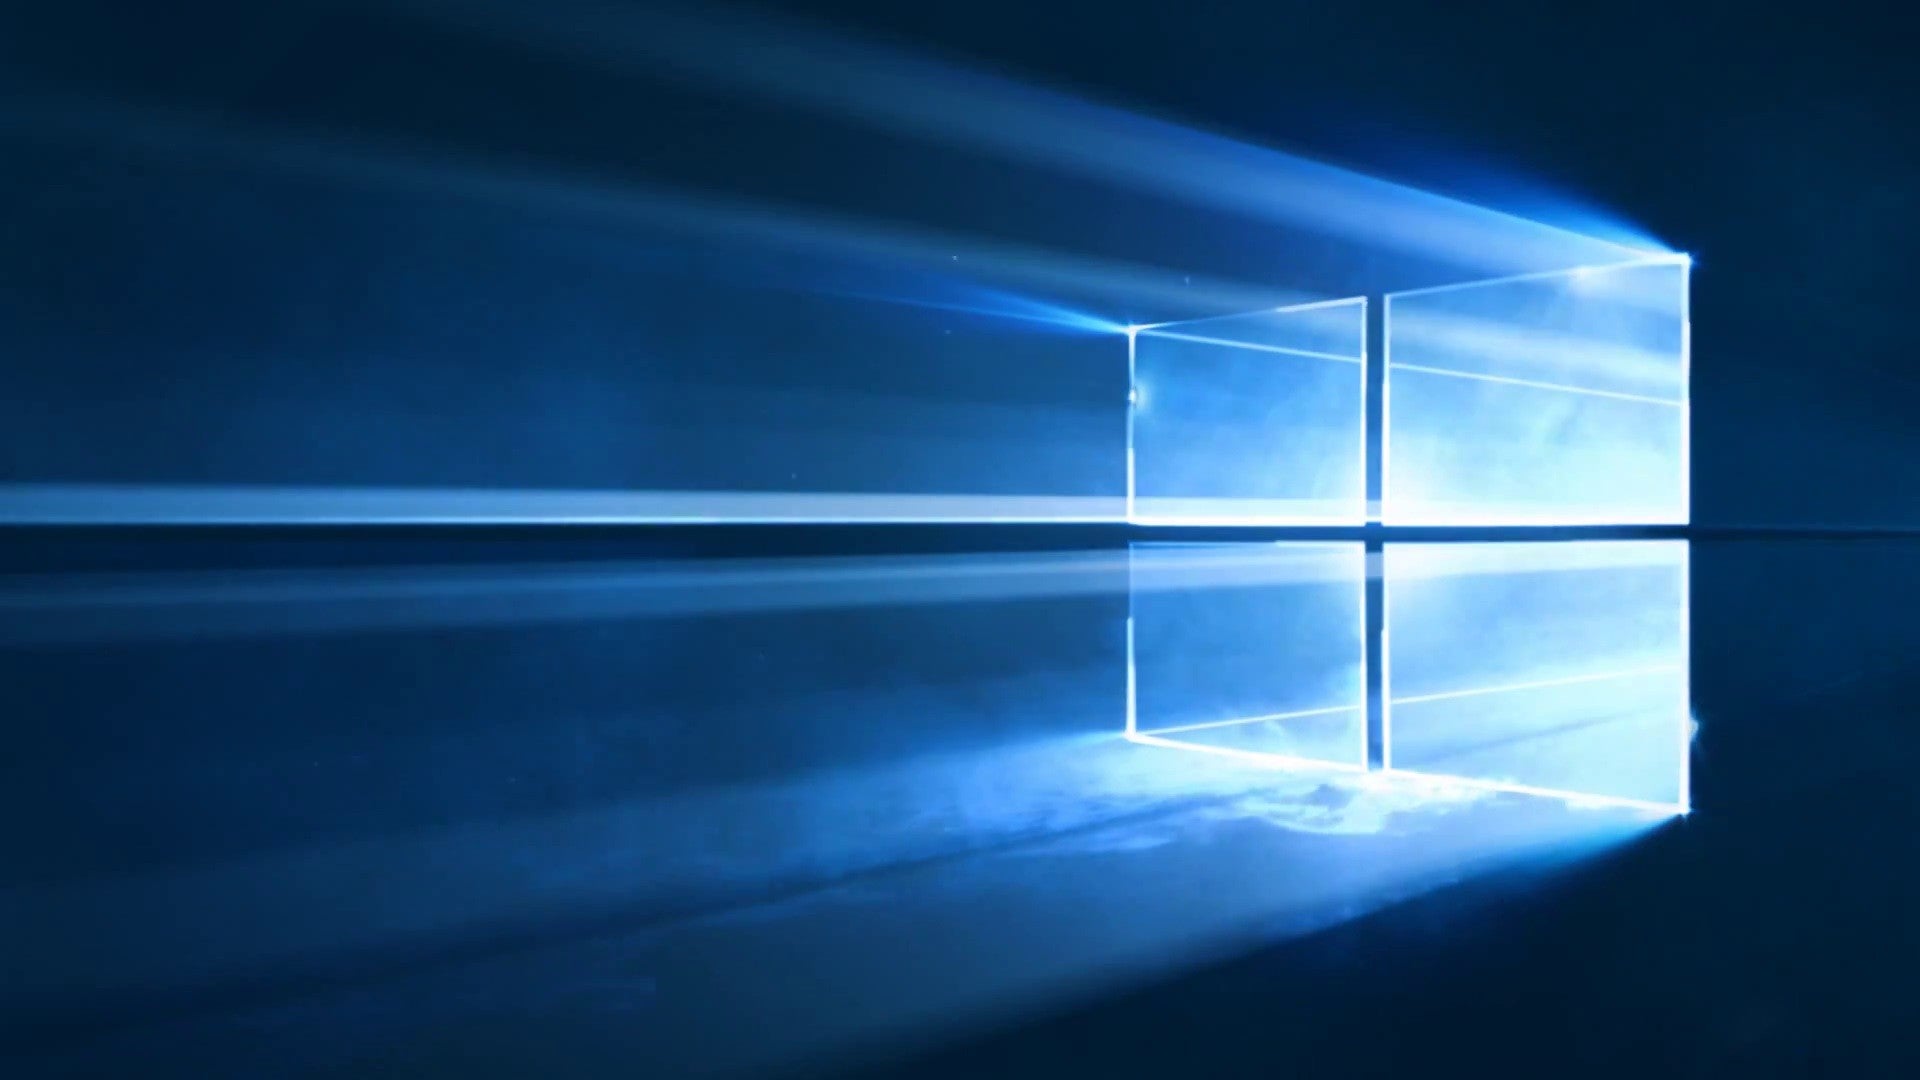 What To Do If You Really, Really Hate Windows 10 But Have Accidentally Upgraded